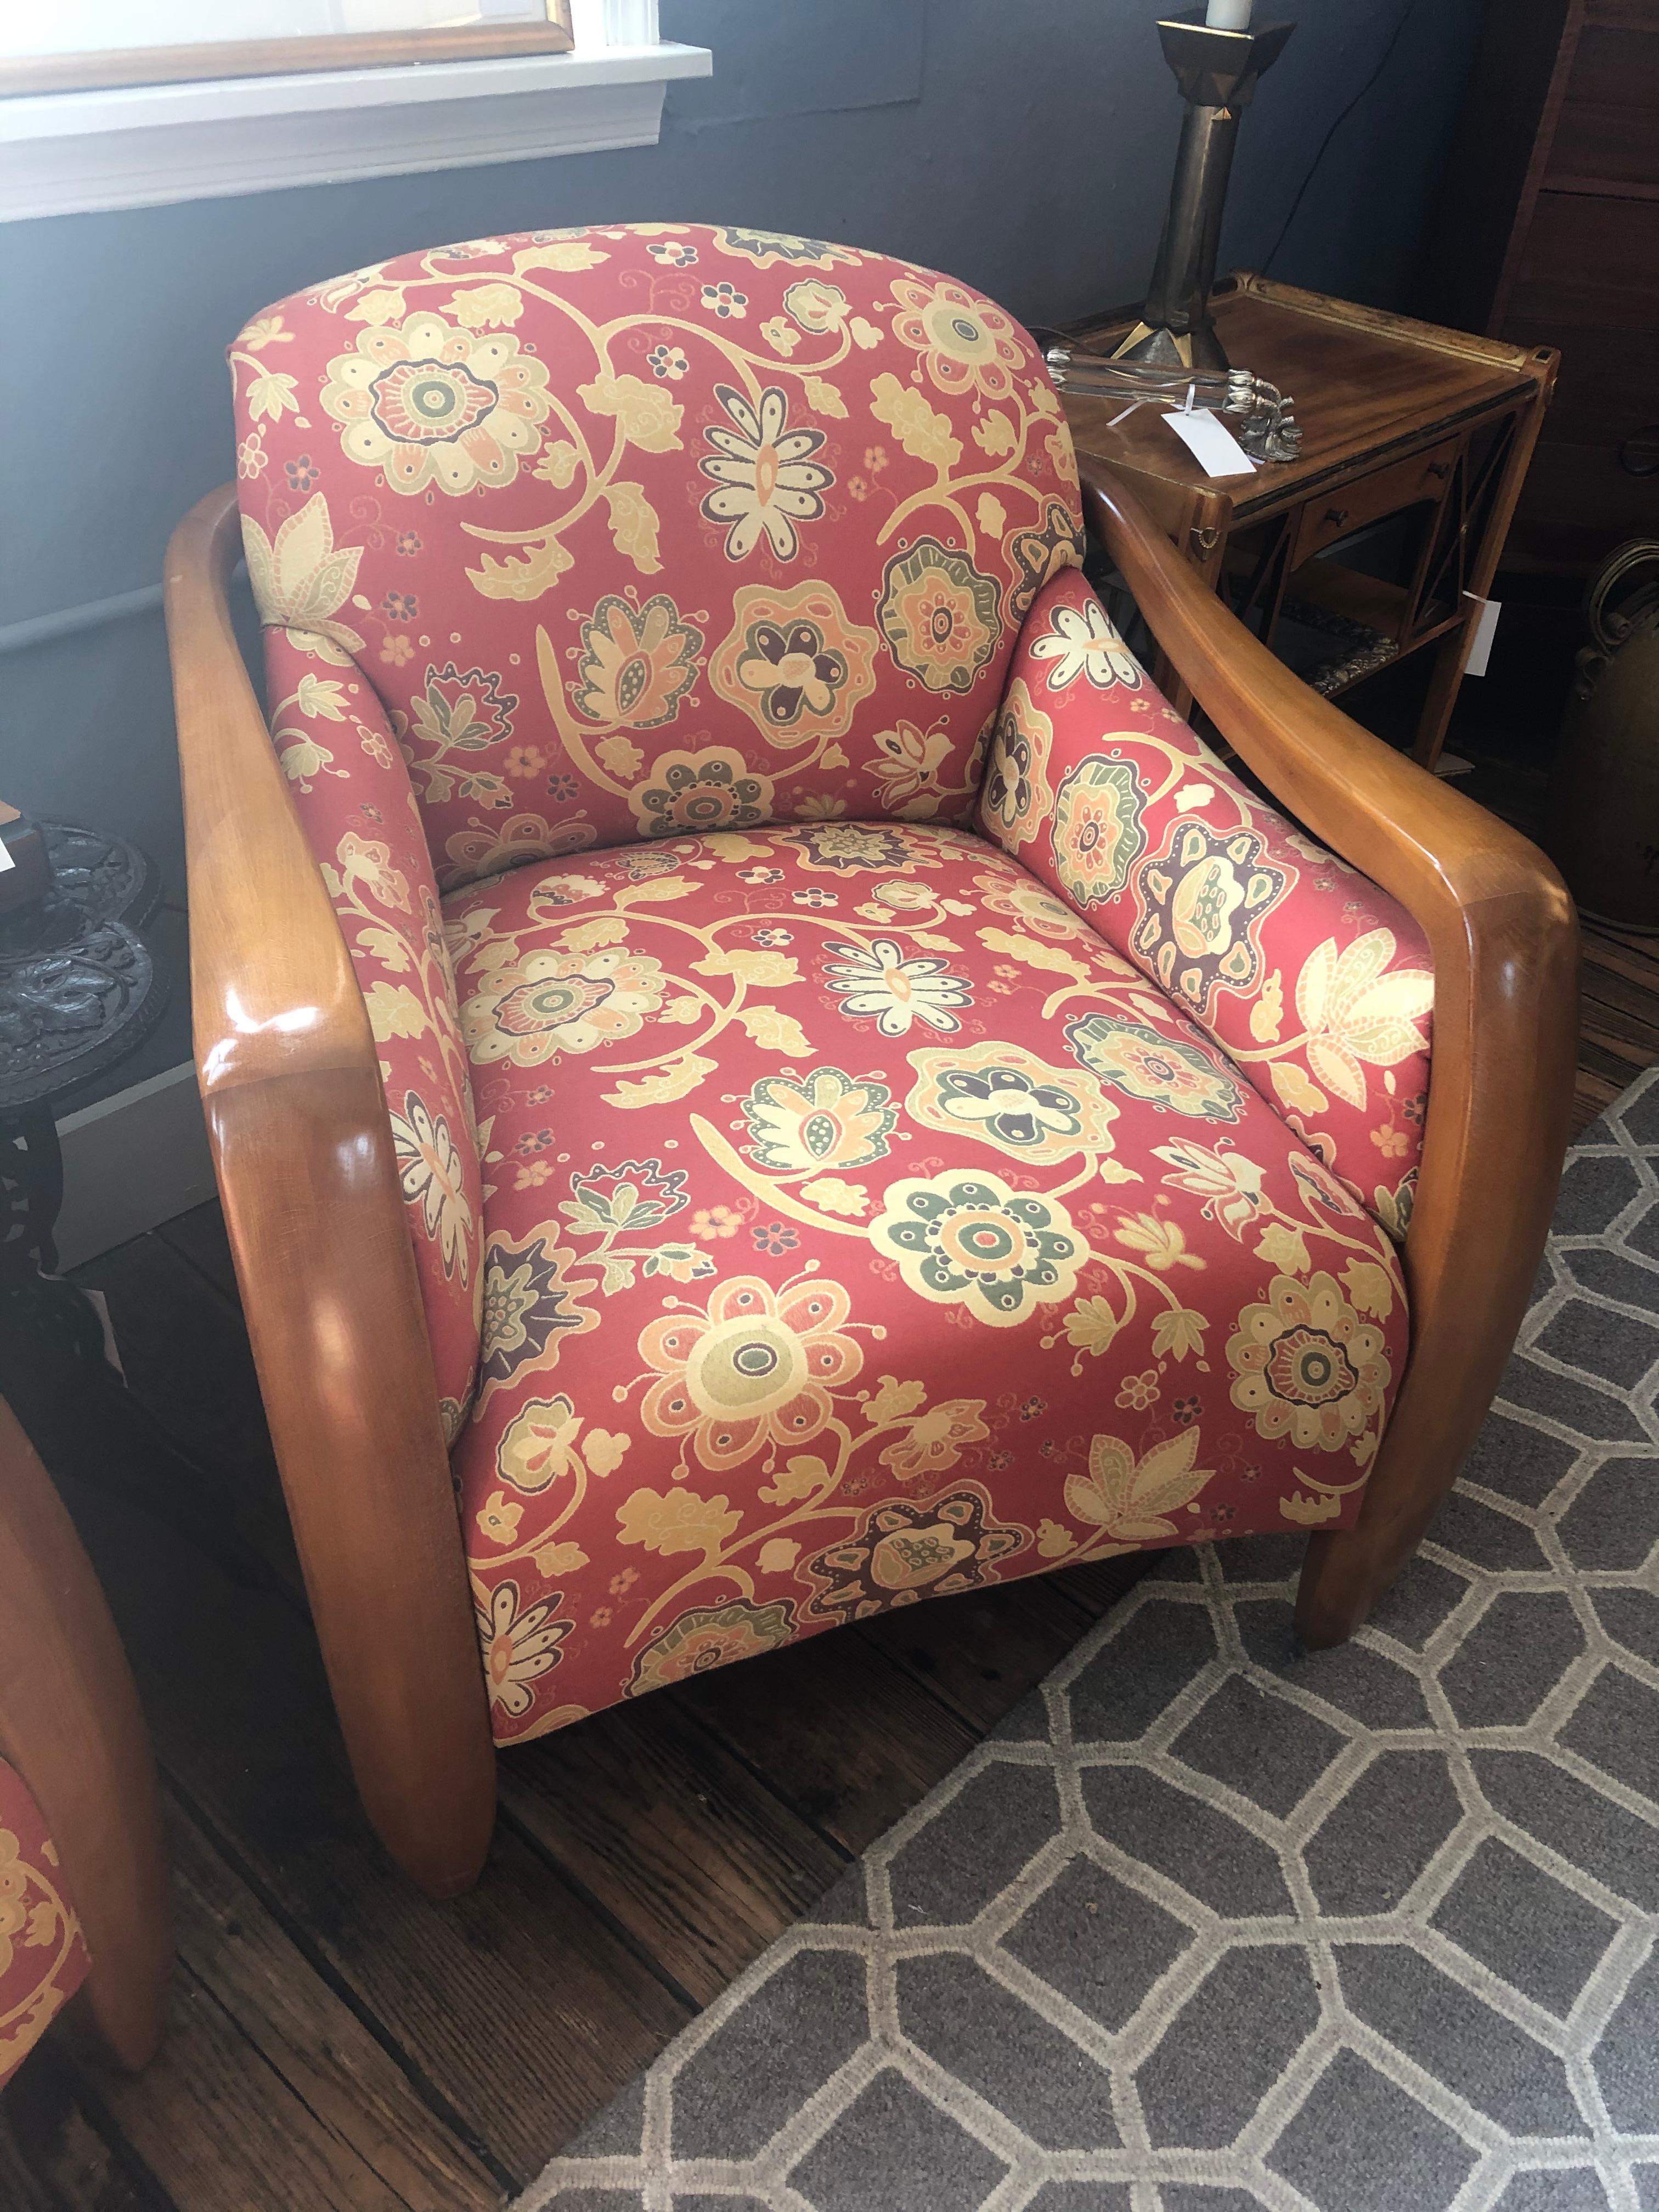 Upholstery Welcoming Set of Classy Art Deco Club Chairs and Matching Ottoman